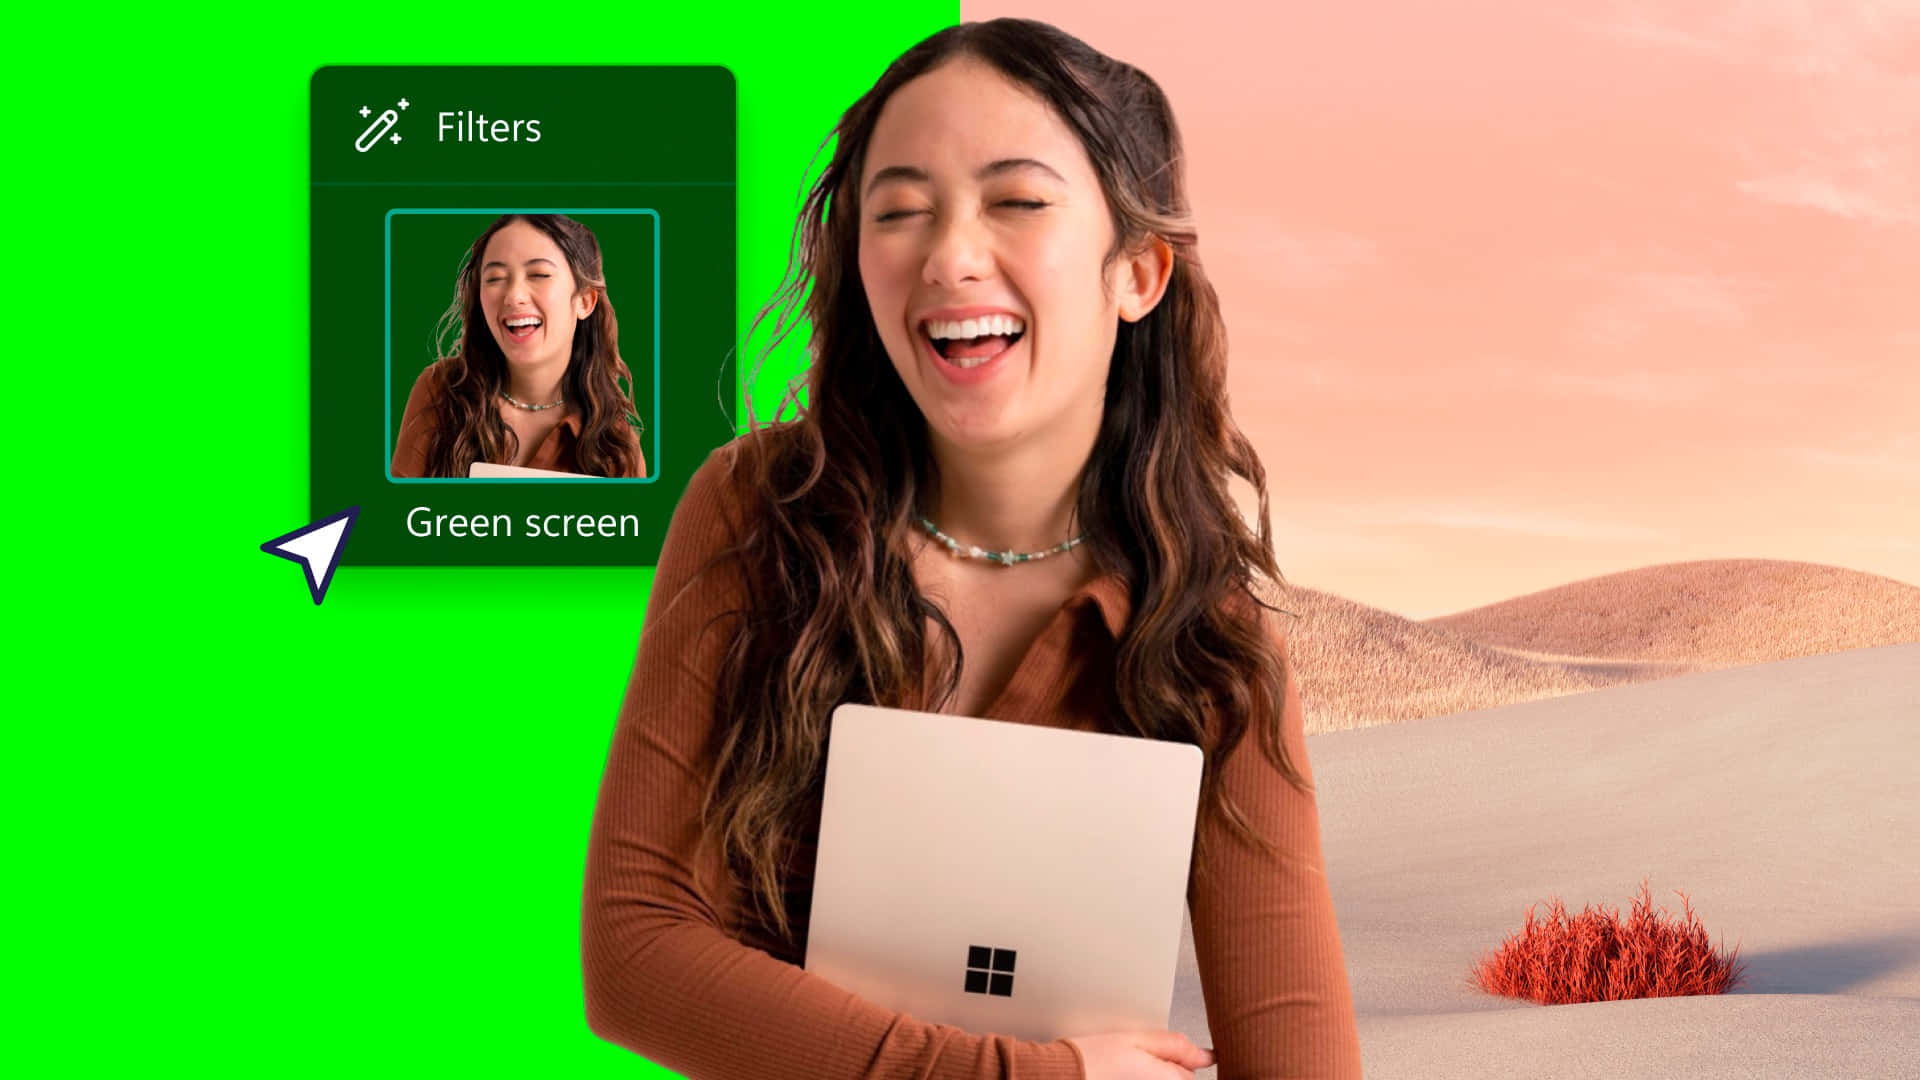 a woman is holding a laptop and smiling at a green screen